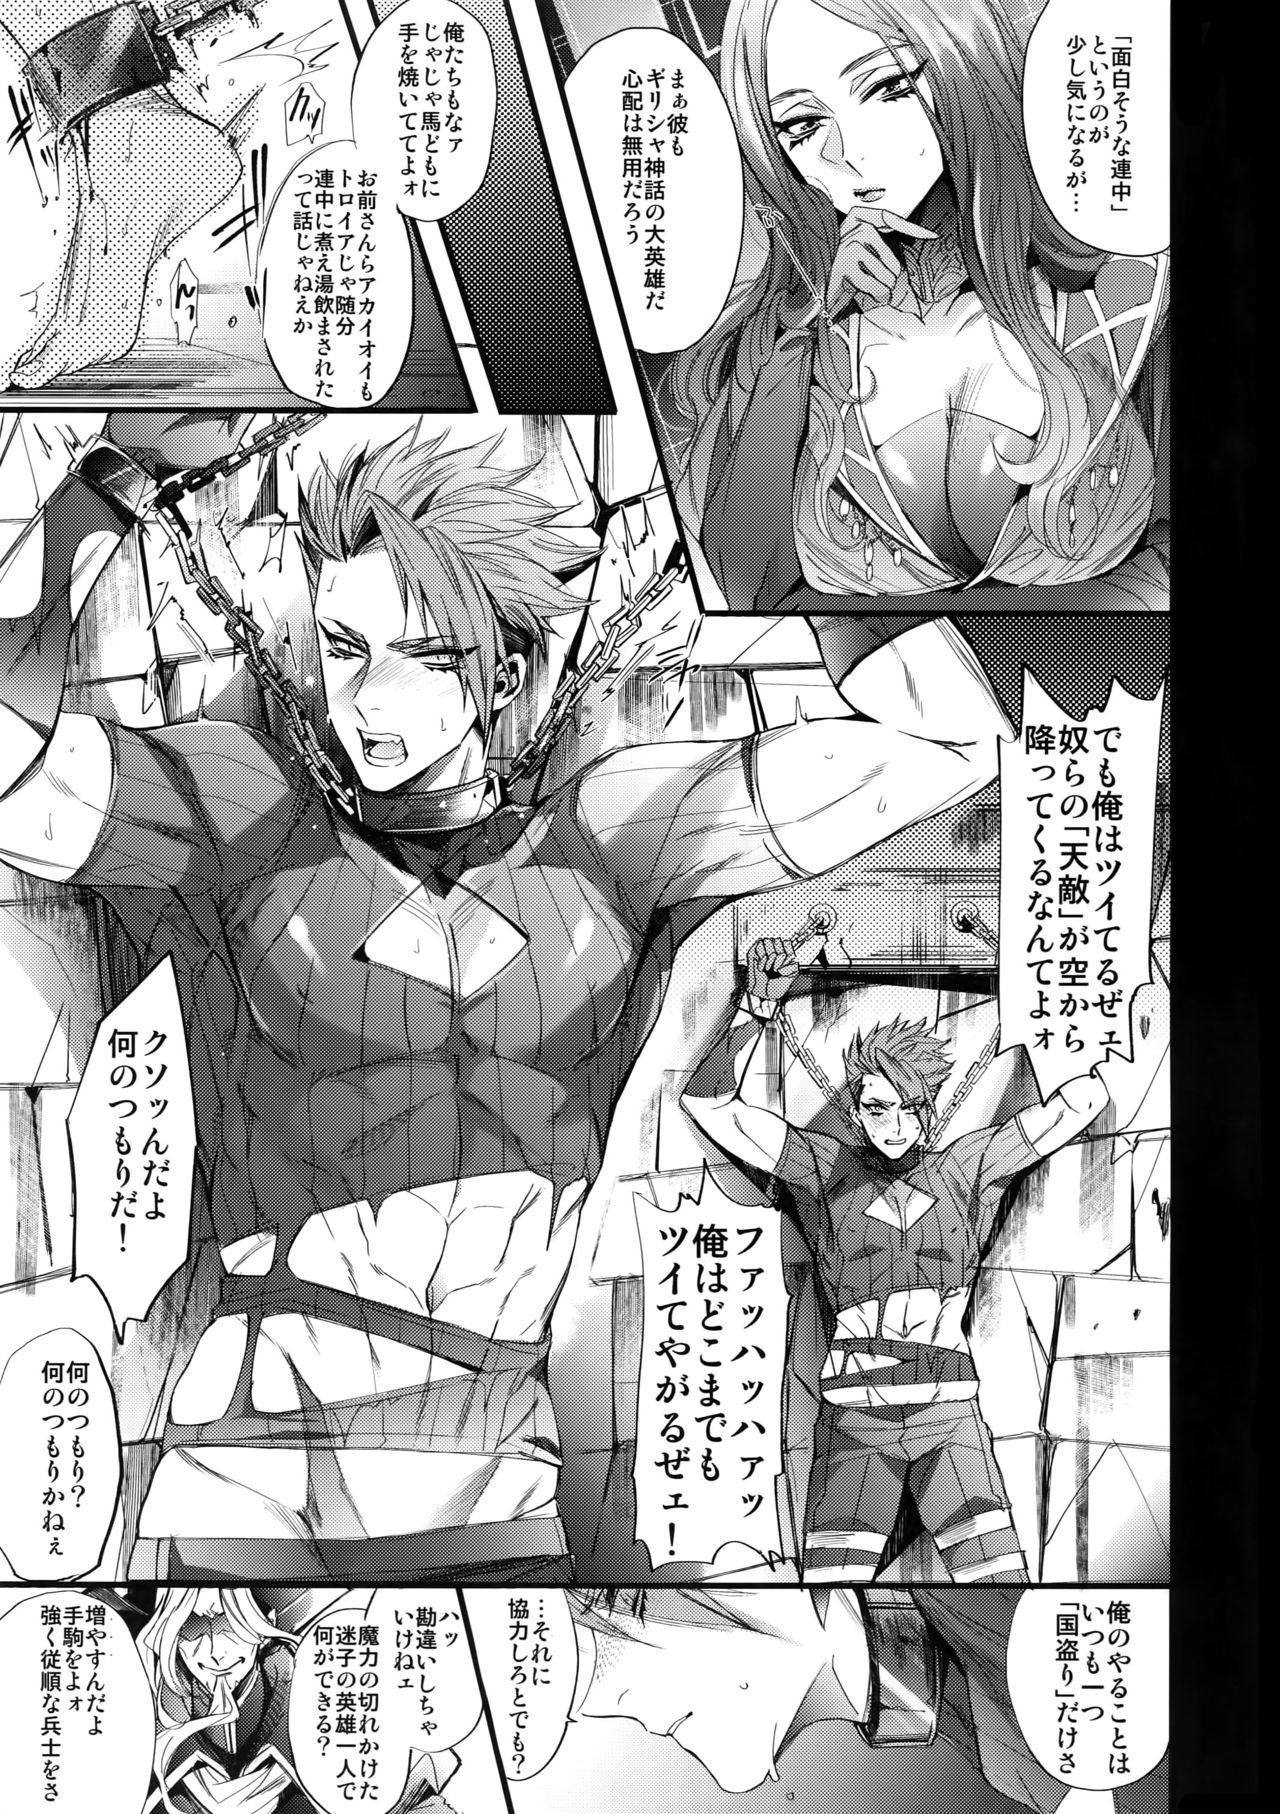 Guys From Dusk Till The End - Fate grand order Innocent - Page 4